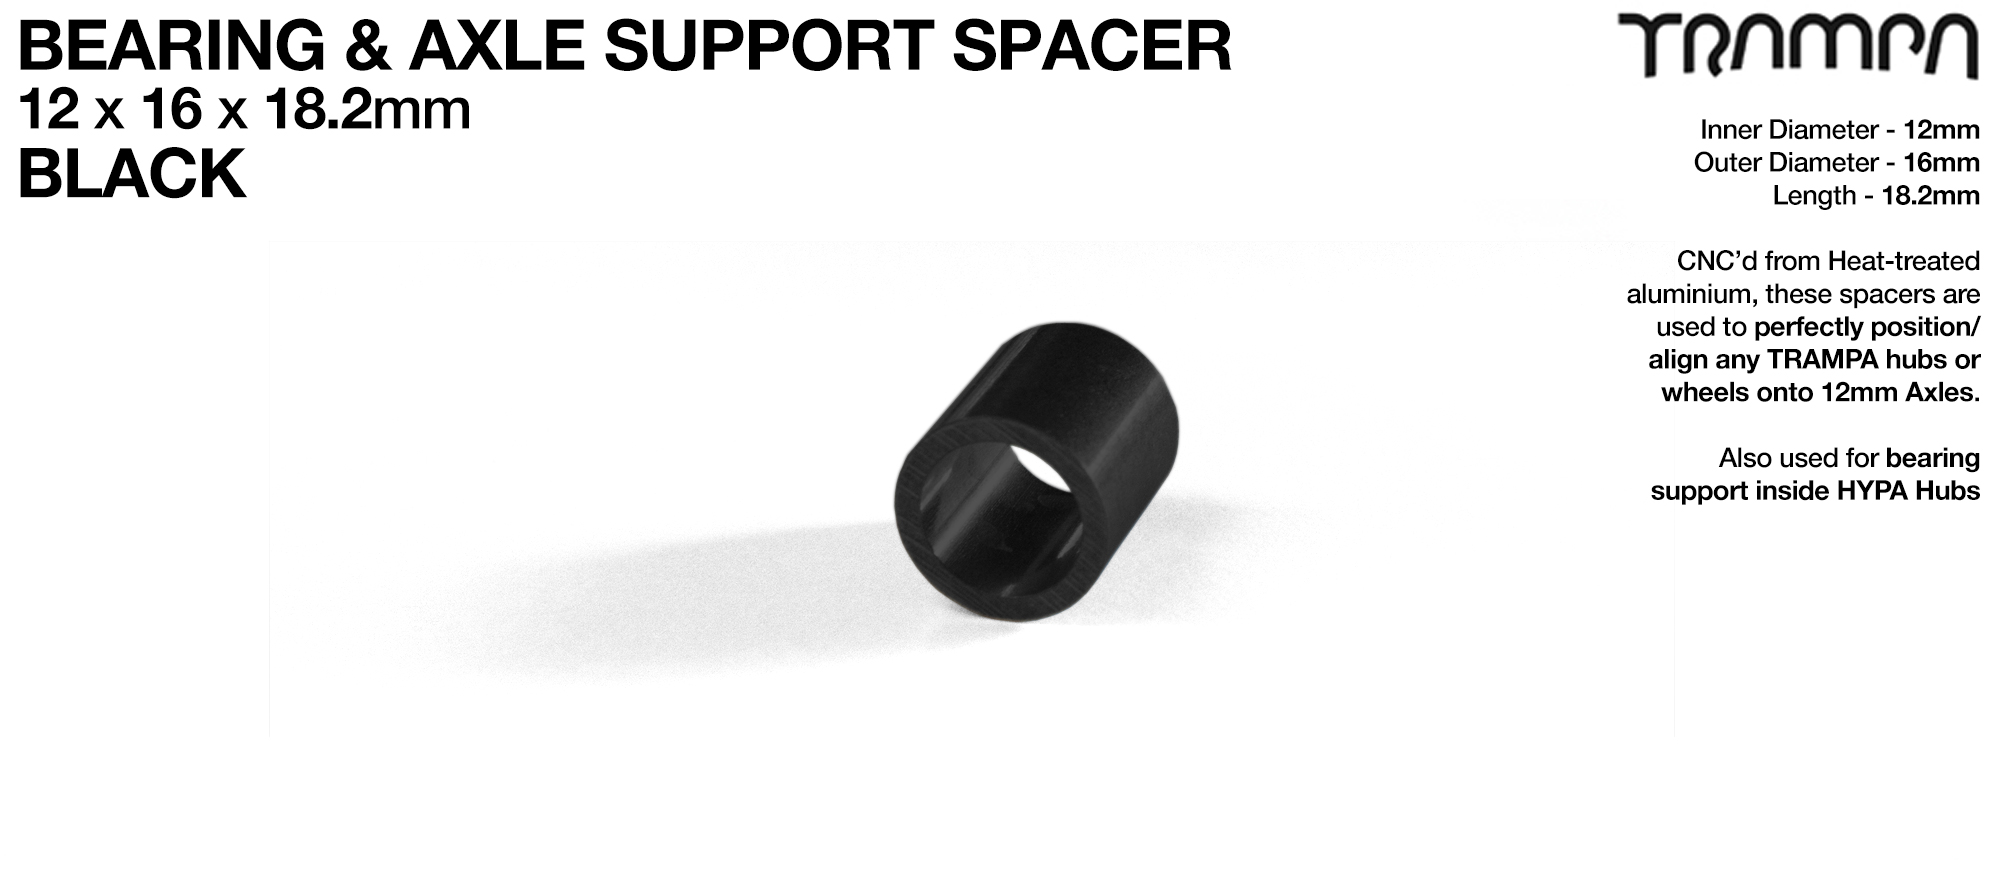 Wheel support spacer for all TRAMPA Wheels on 12mm ATB Axles - CNC precision 12mm x 16mm x 18.2mm - BLACK